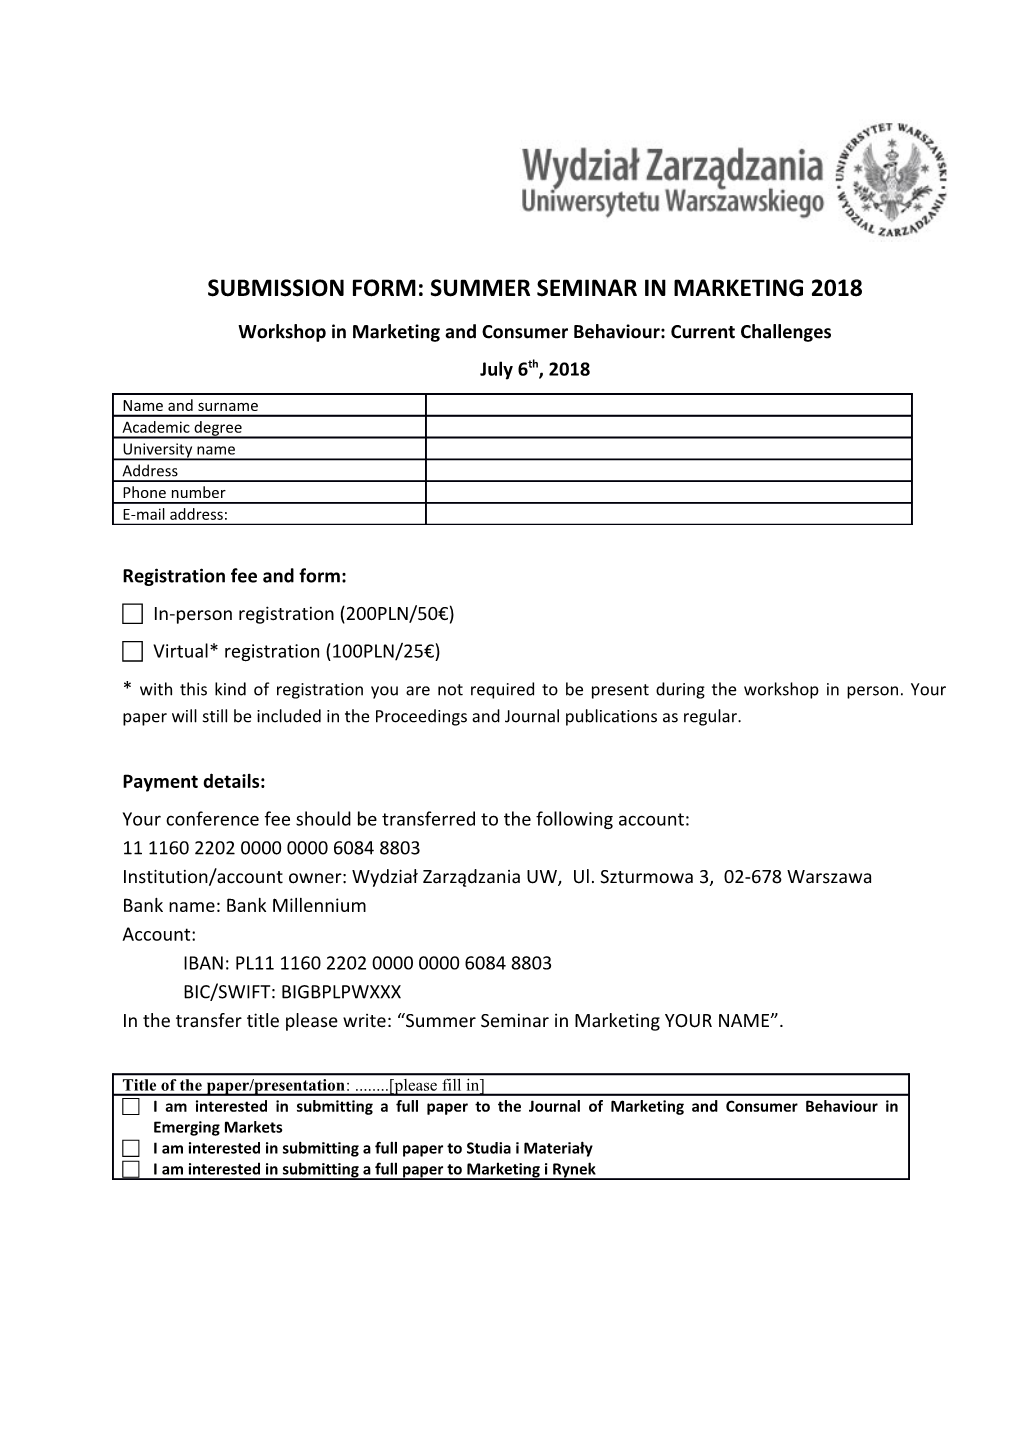 Submission Form: Summer Seminar in Marketing 2018